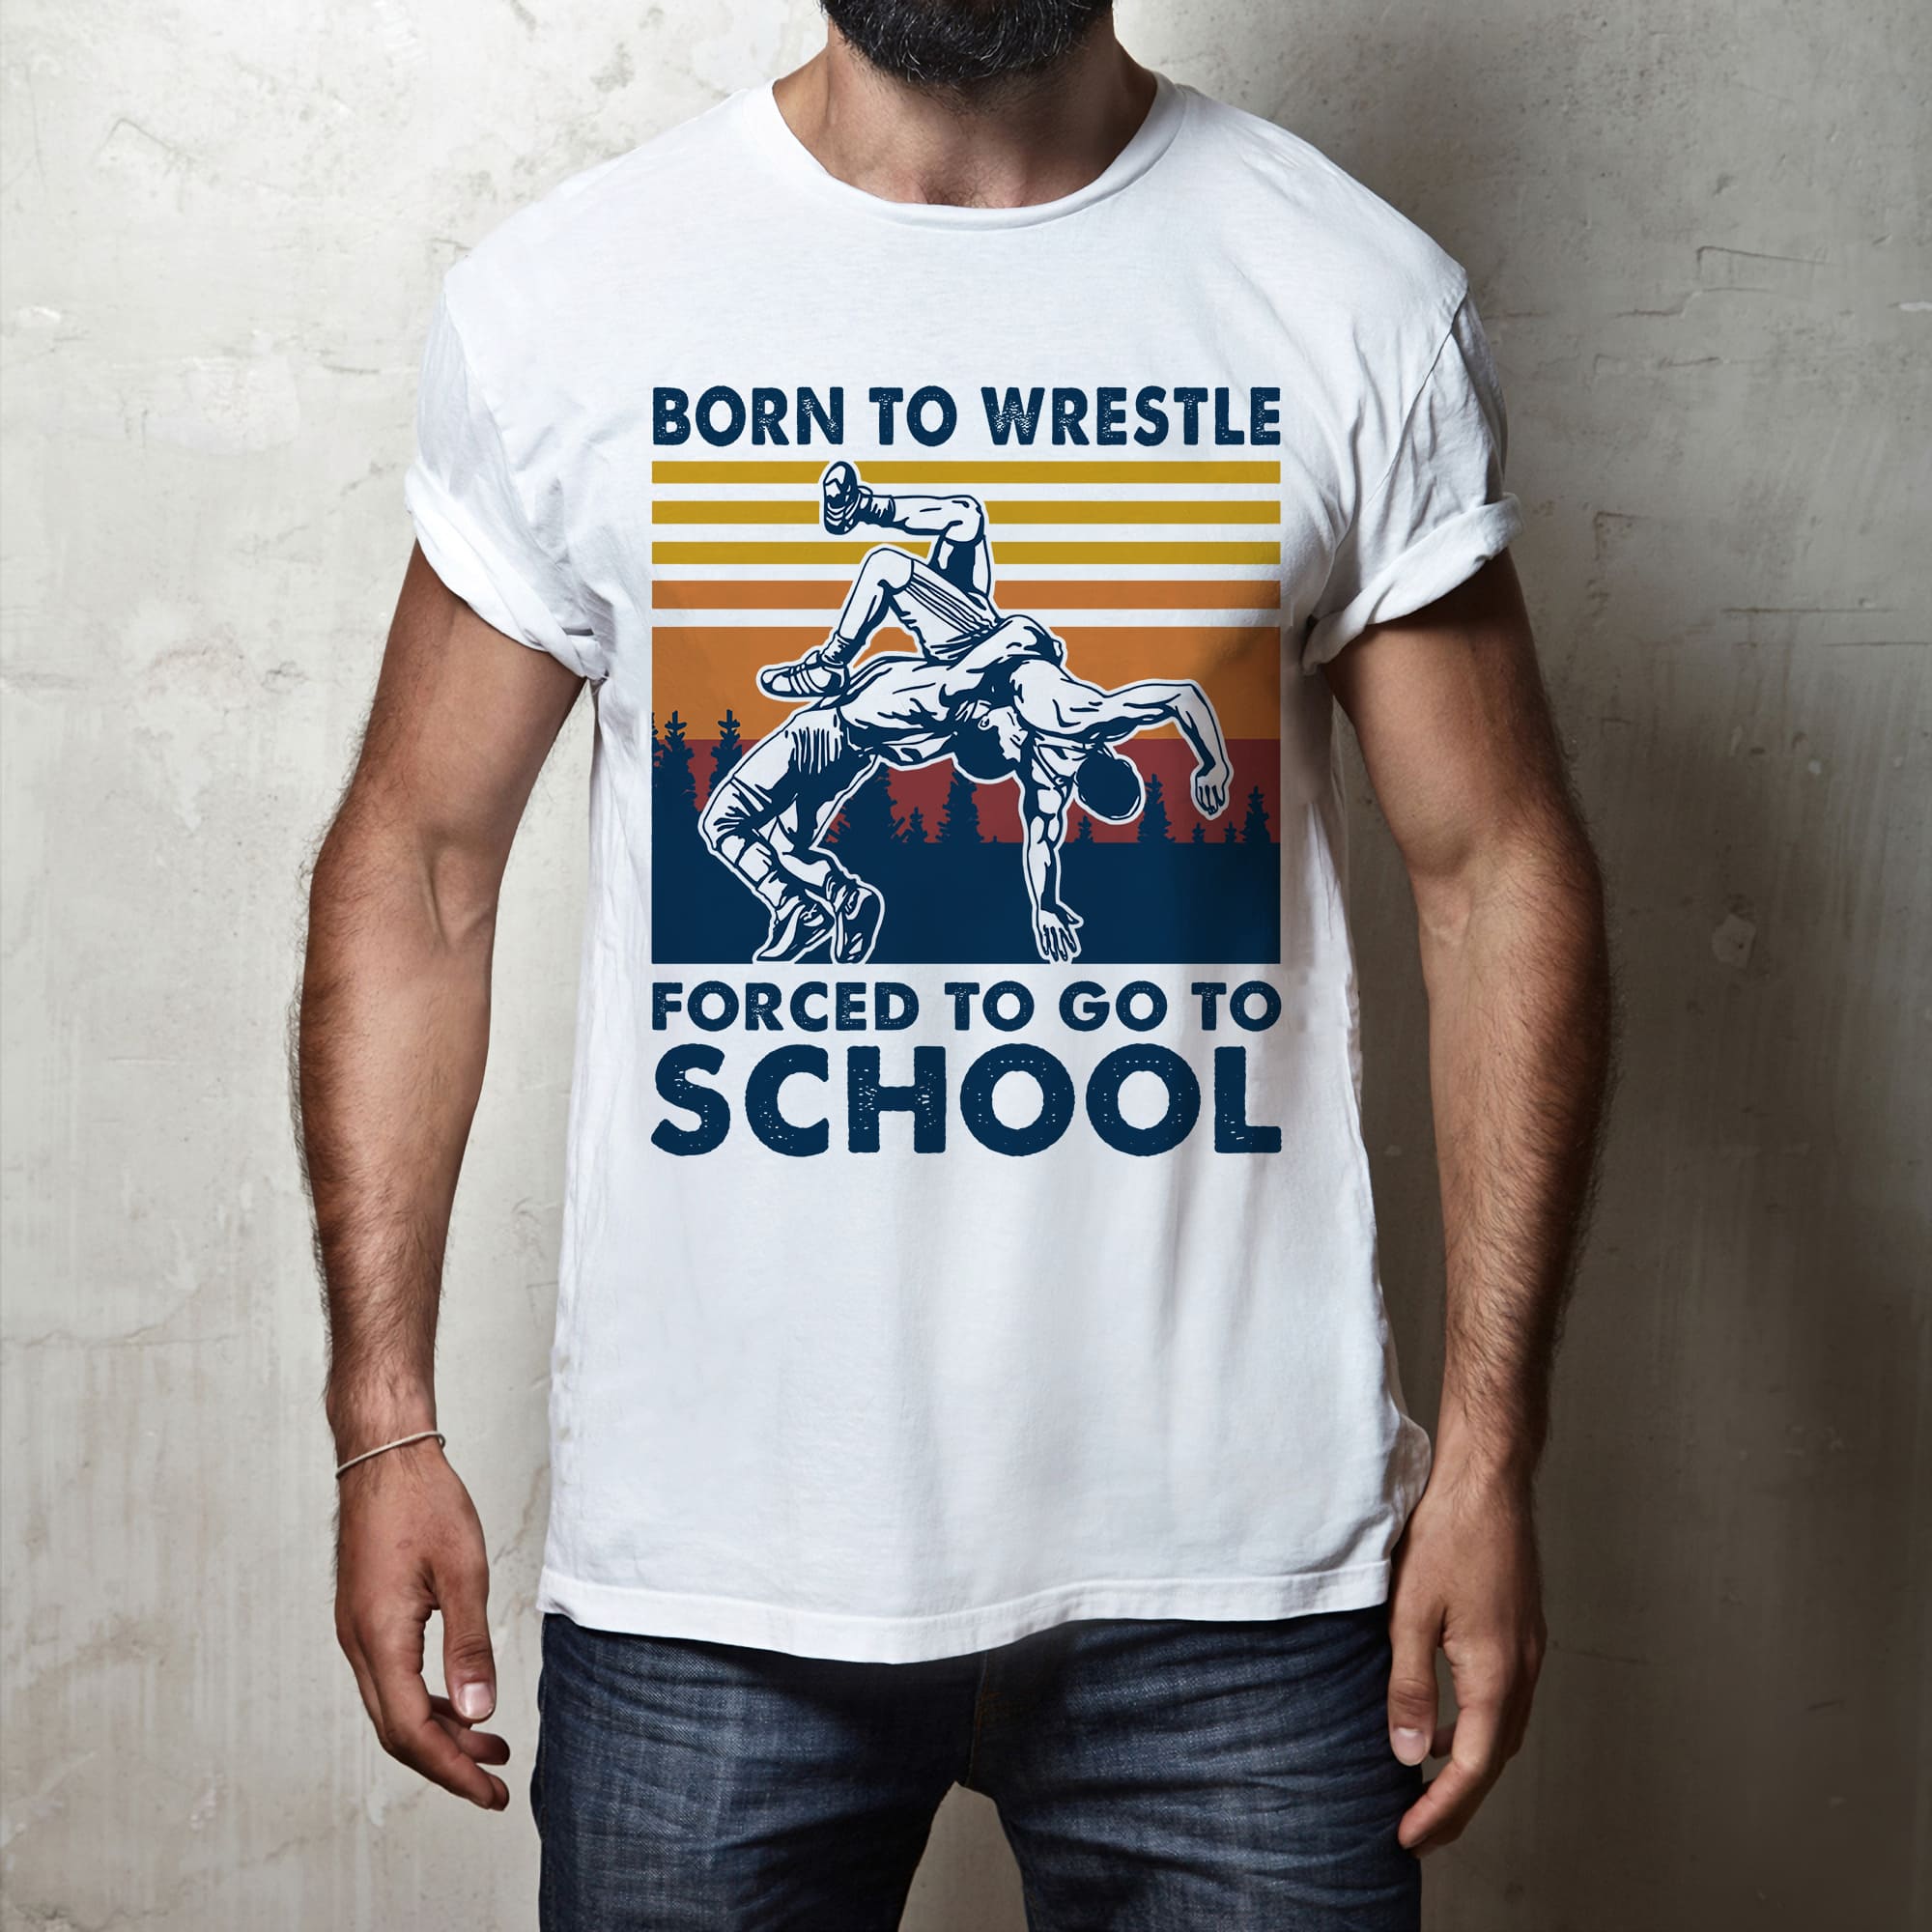 Born to wrestle, forced to go to school - Gift for professional wrestlers